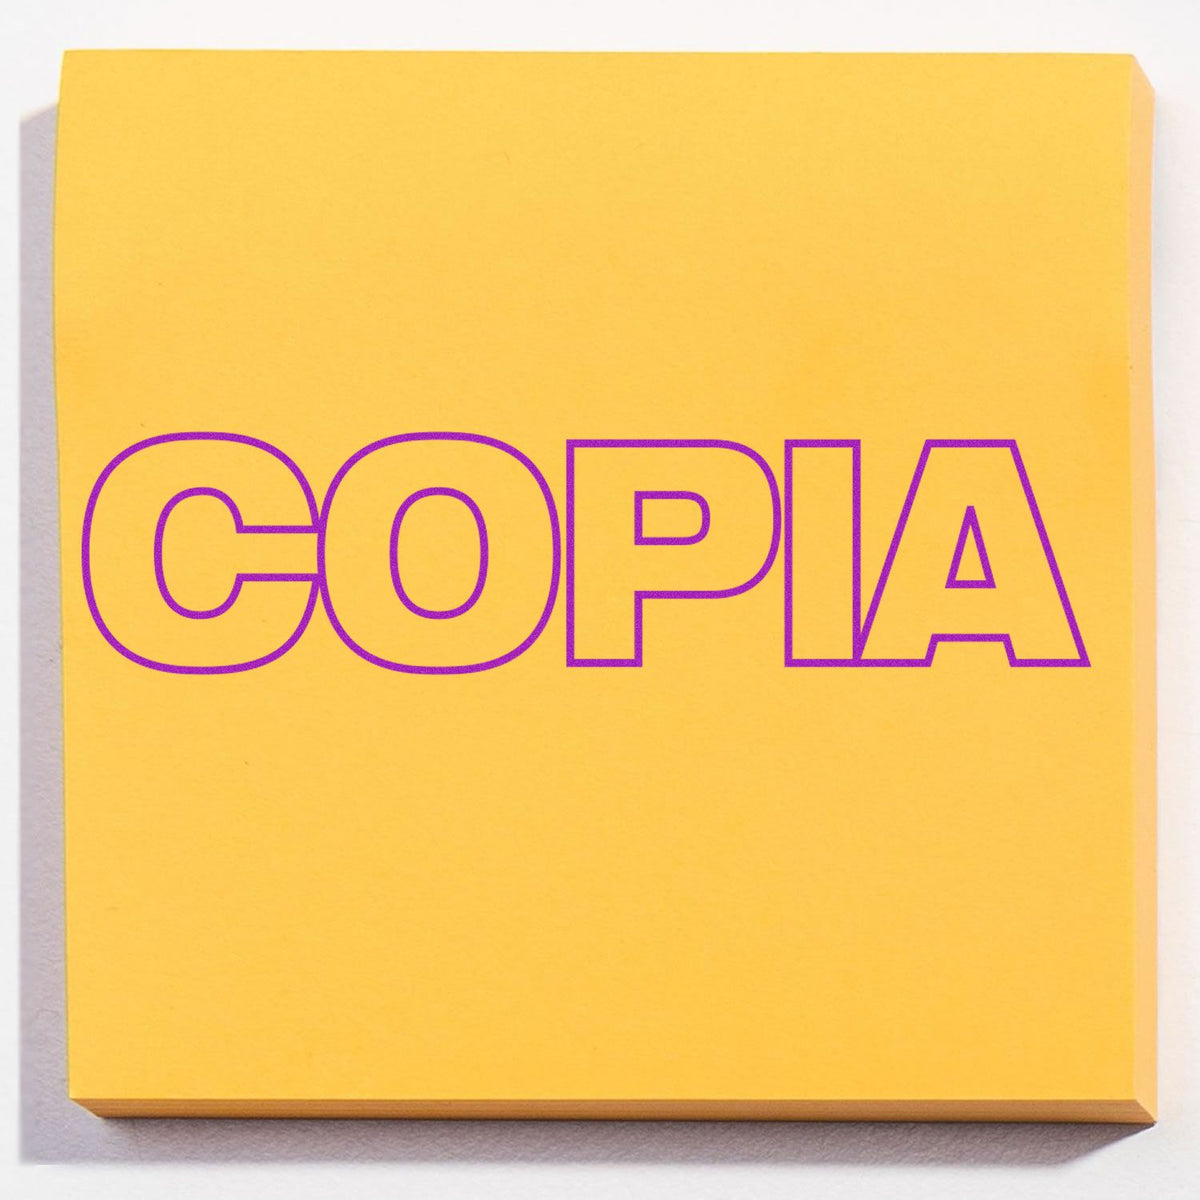 Copia Rubber Stamp In Use